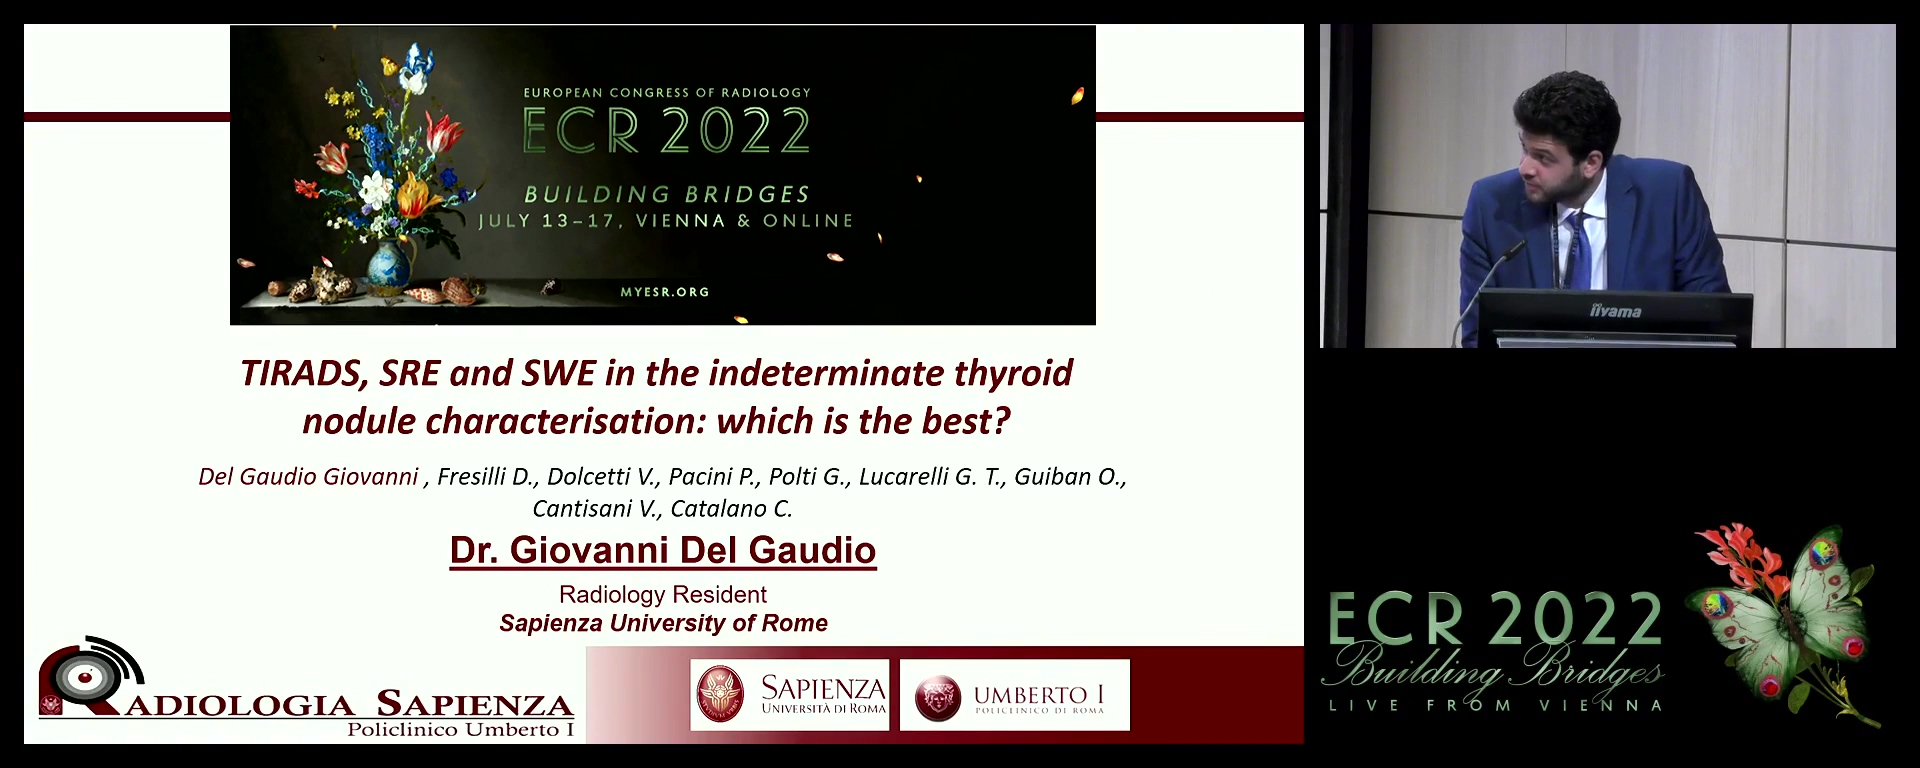 TIRADS, SRE and SWE in the indeterminate thyroid nodule characterisation: which is the best?